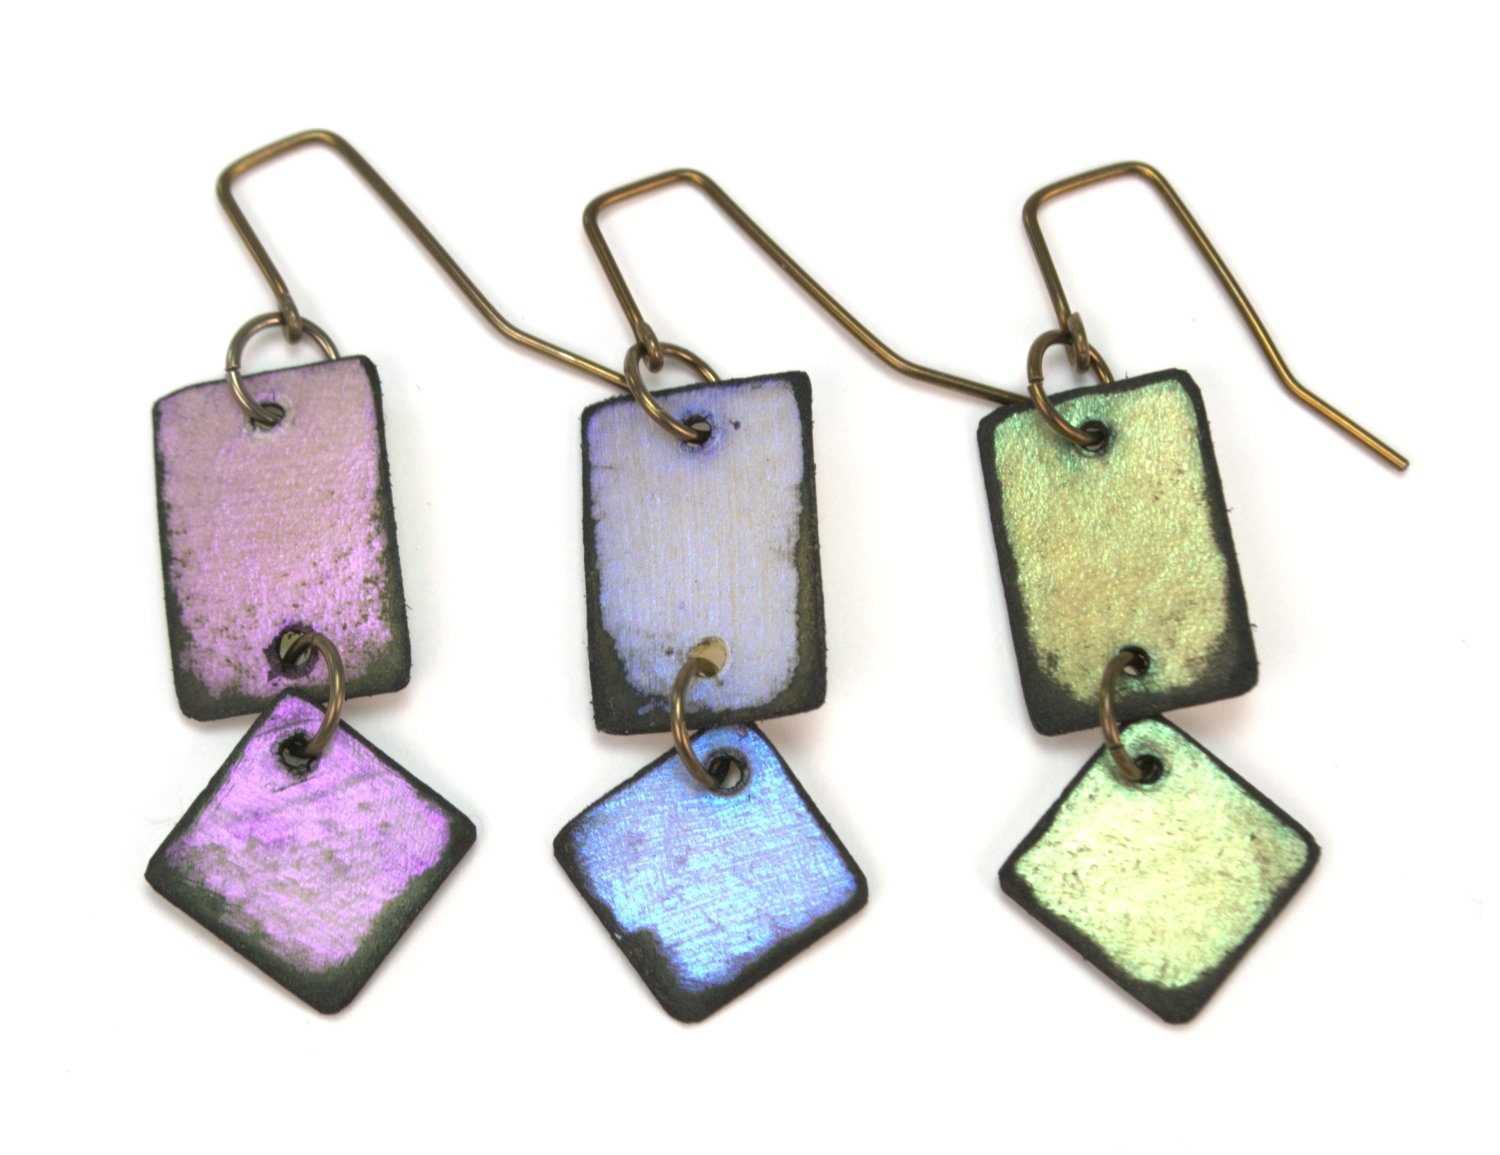 Lazy Diamond earrings in three iridescent colors, violet, blue and green